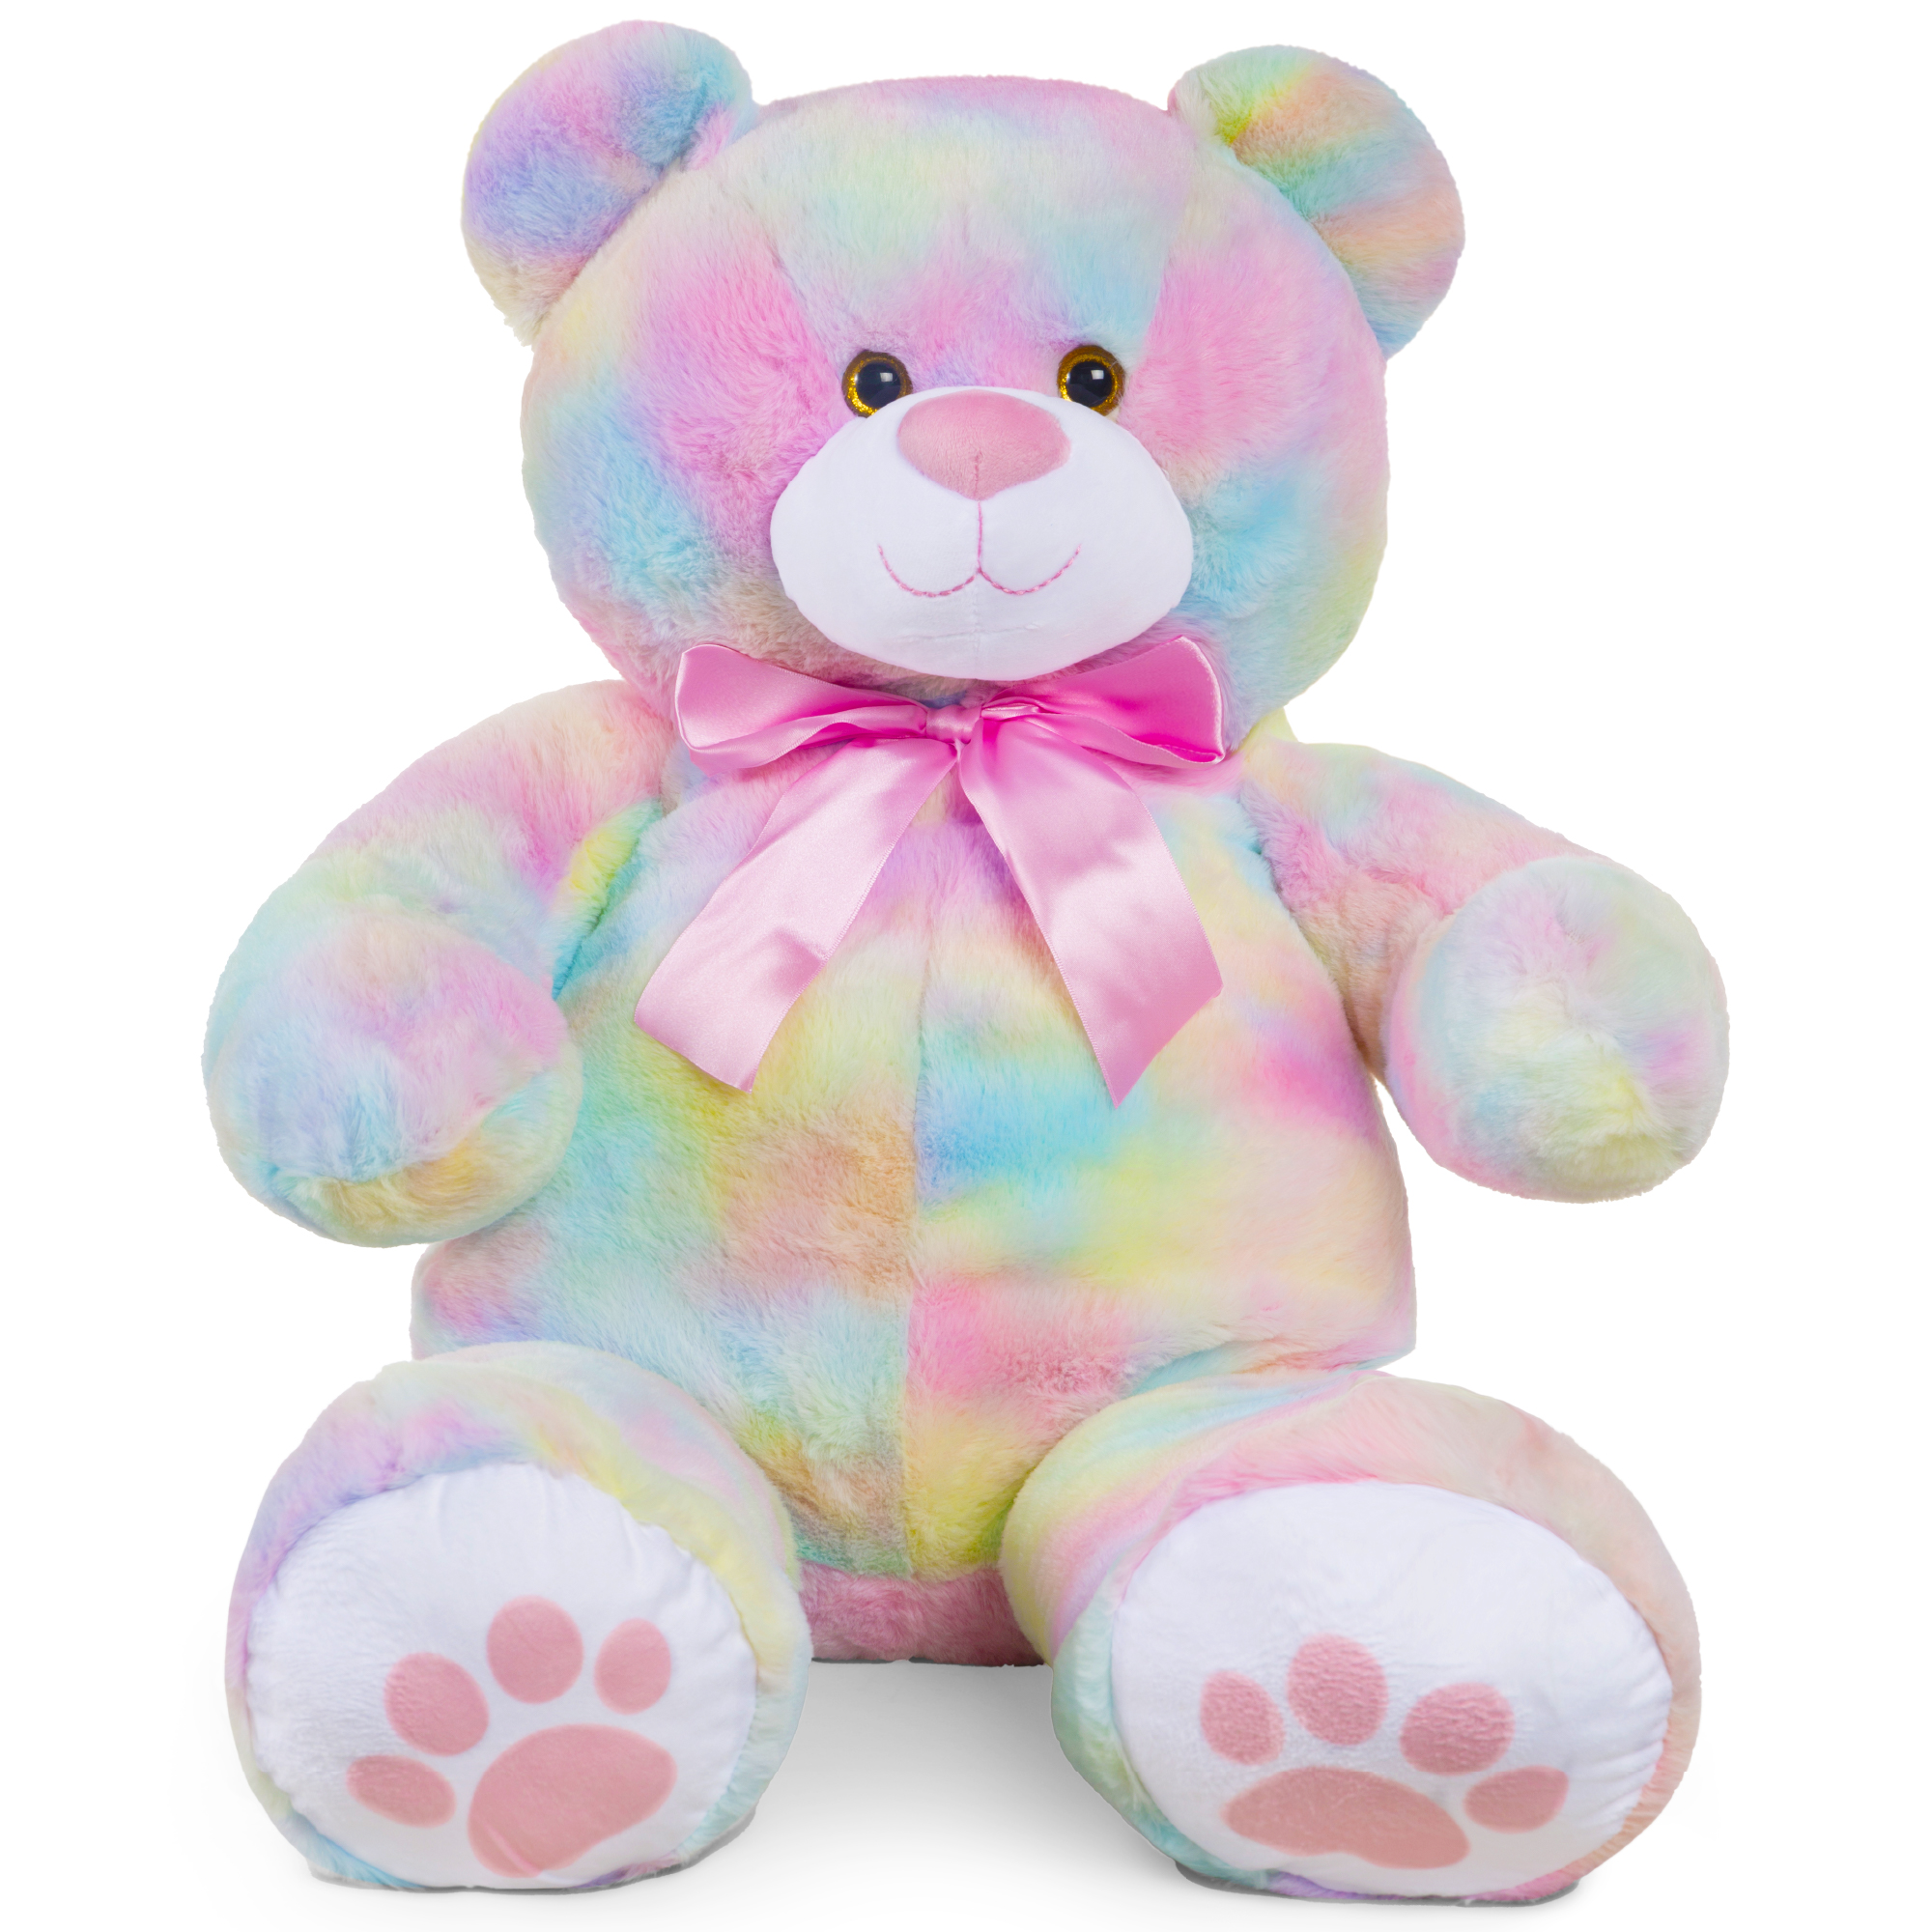 Best Choice Products 35in Giant Soft Plush Teddy Bear Stuffed Animal Toy w/ Bow Tie, Footprints - Pastel - image 1 of 8